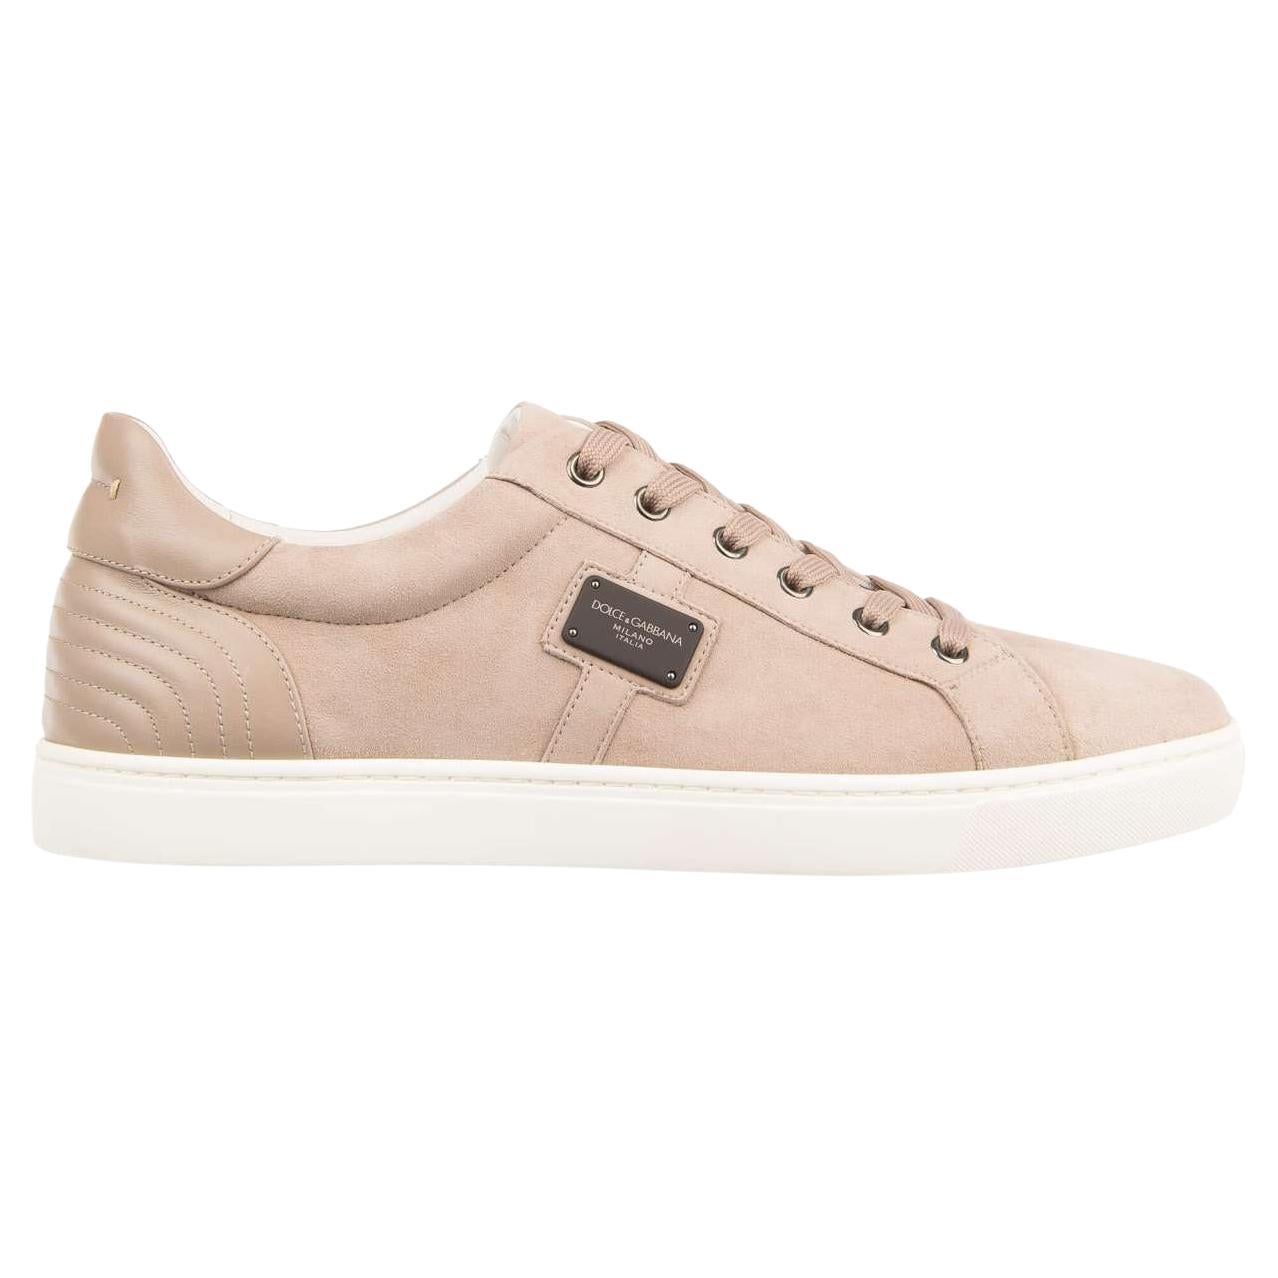 D&G Low-Top Suede Sneaker LONDON with DG Logo Plate Beige White 41 UK 7 US 8 For Sale